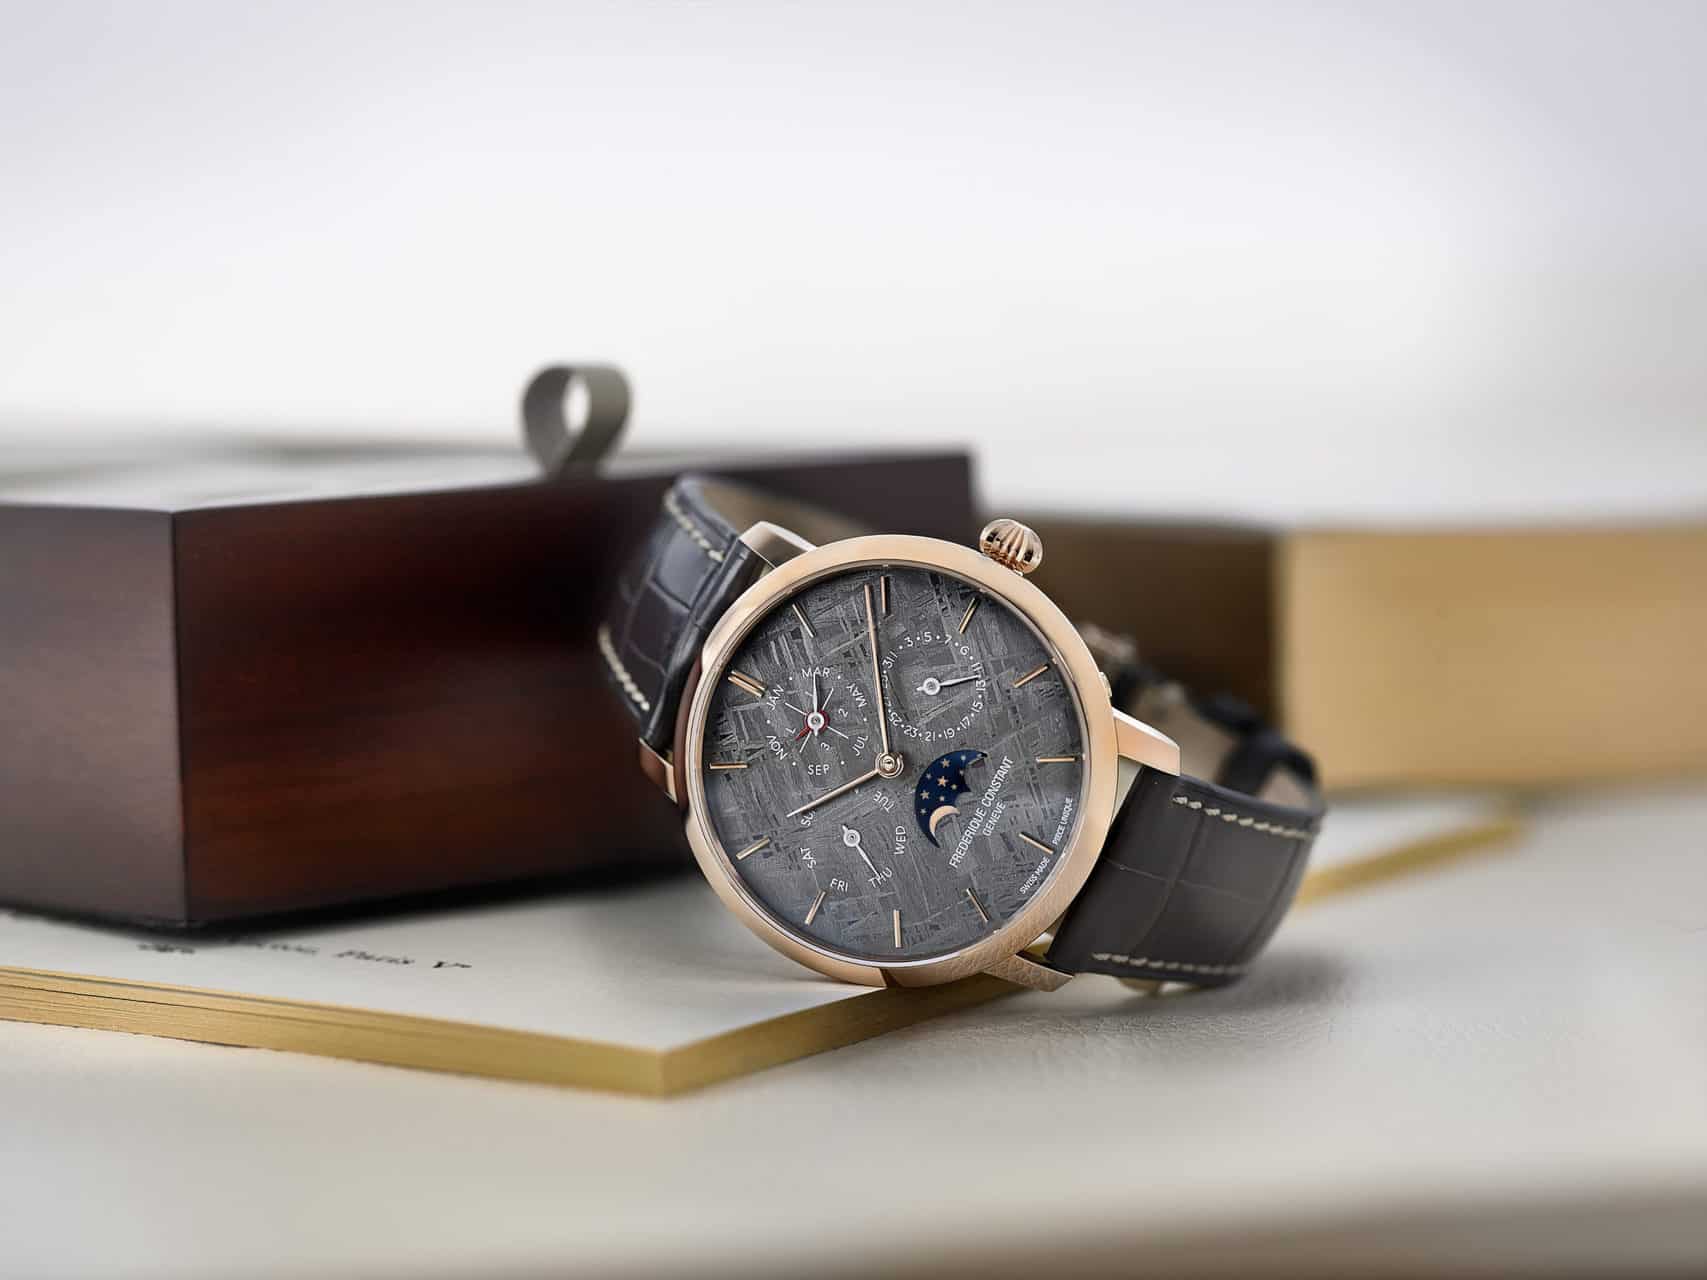 Frederique Constant at Only Watch: Unique Timepiece for a Good Cause